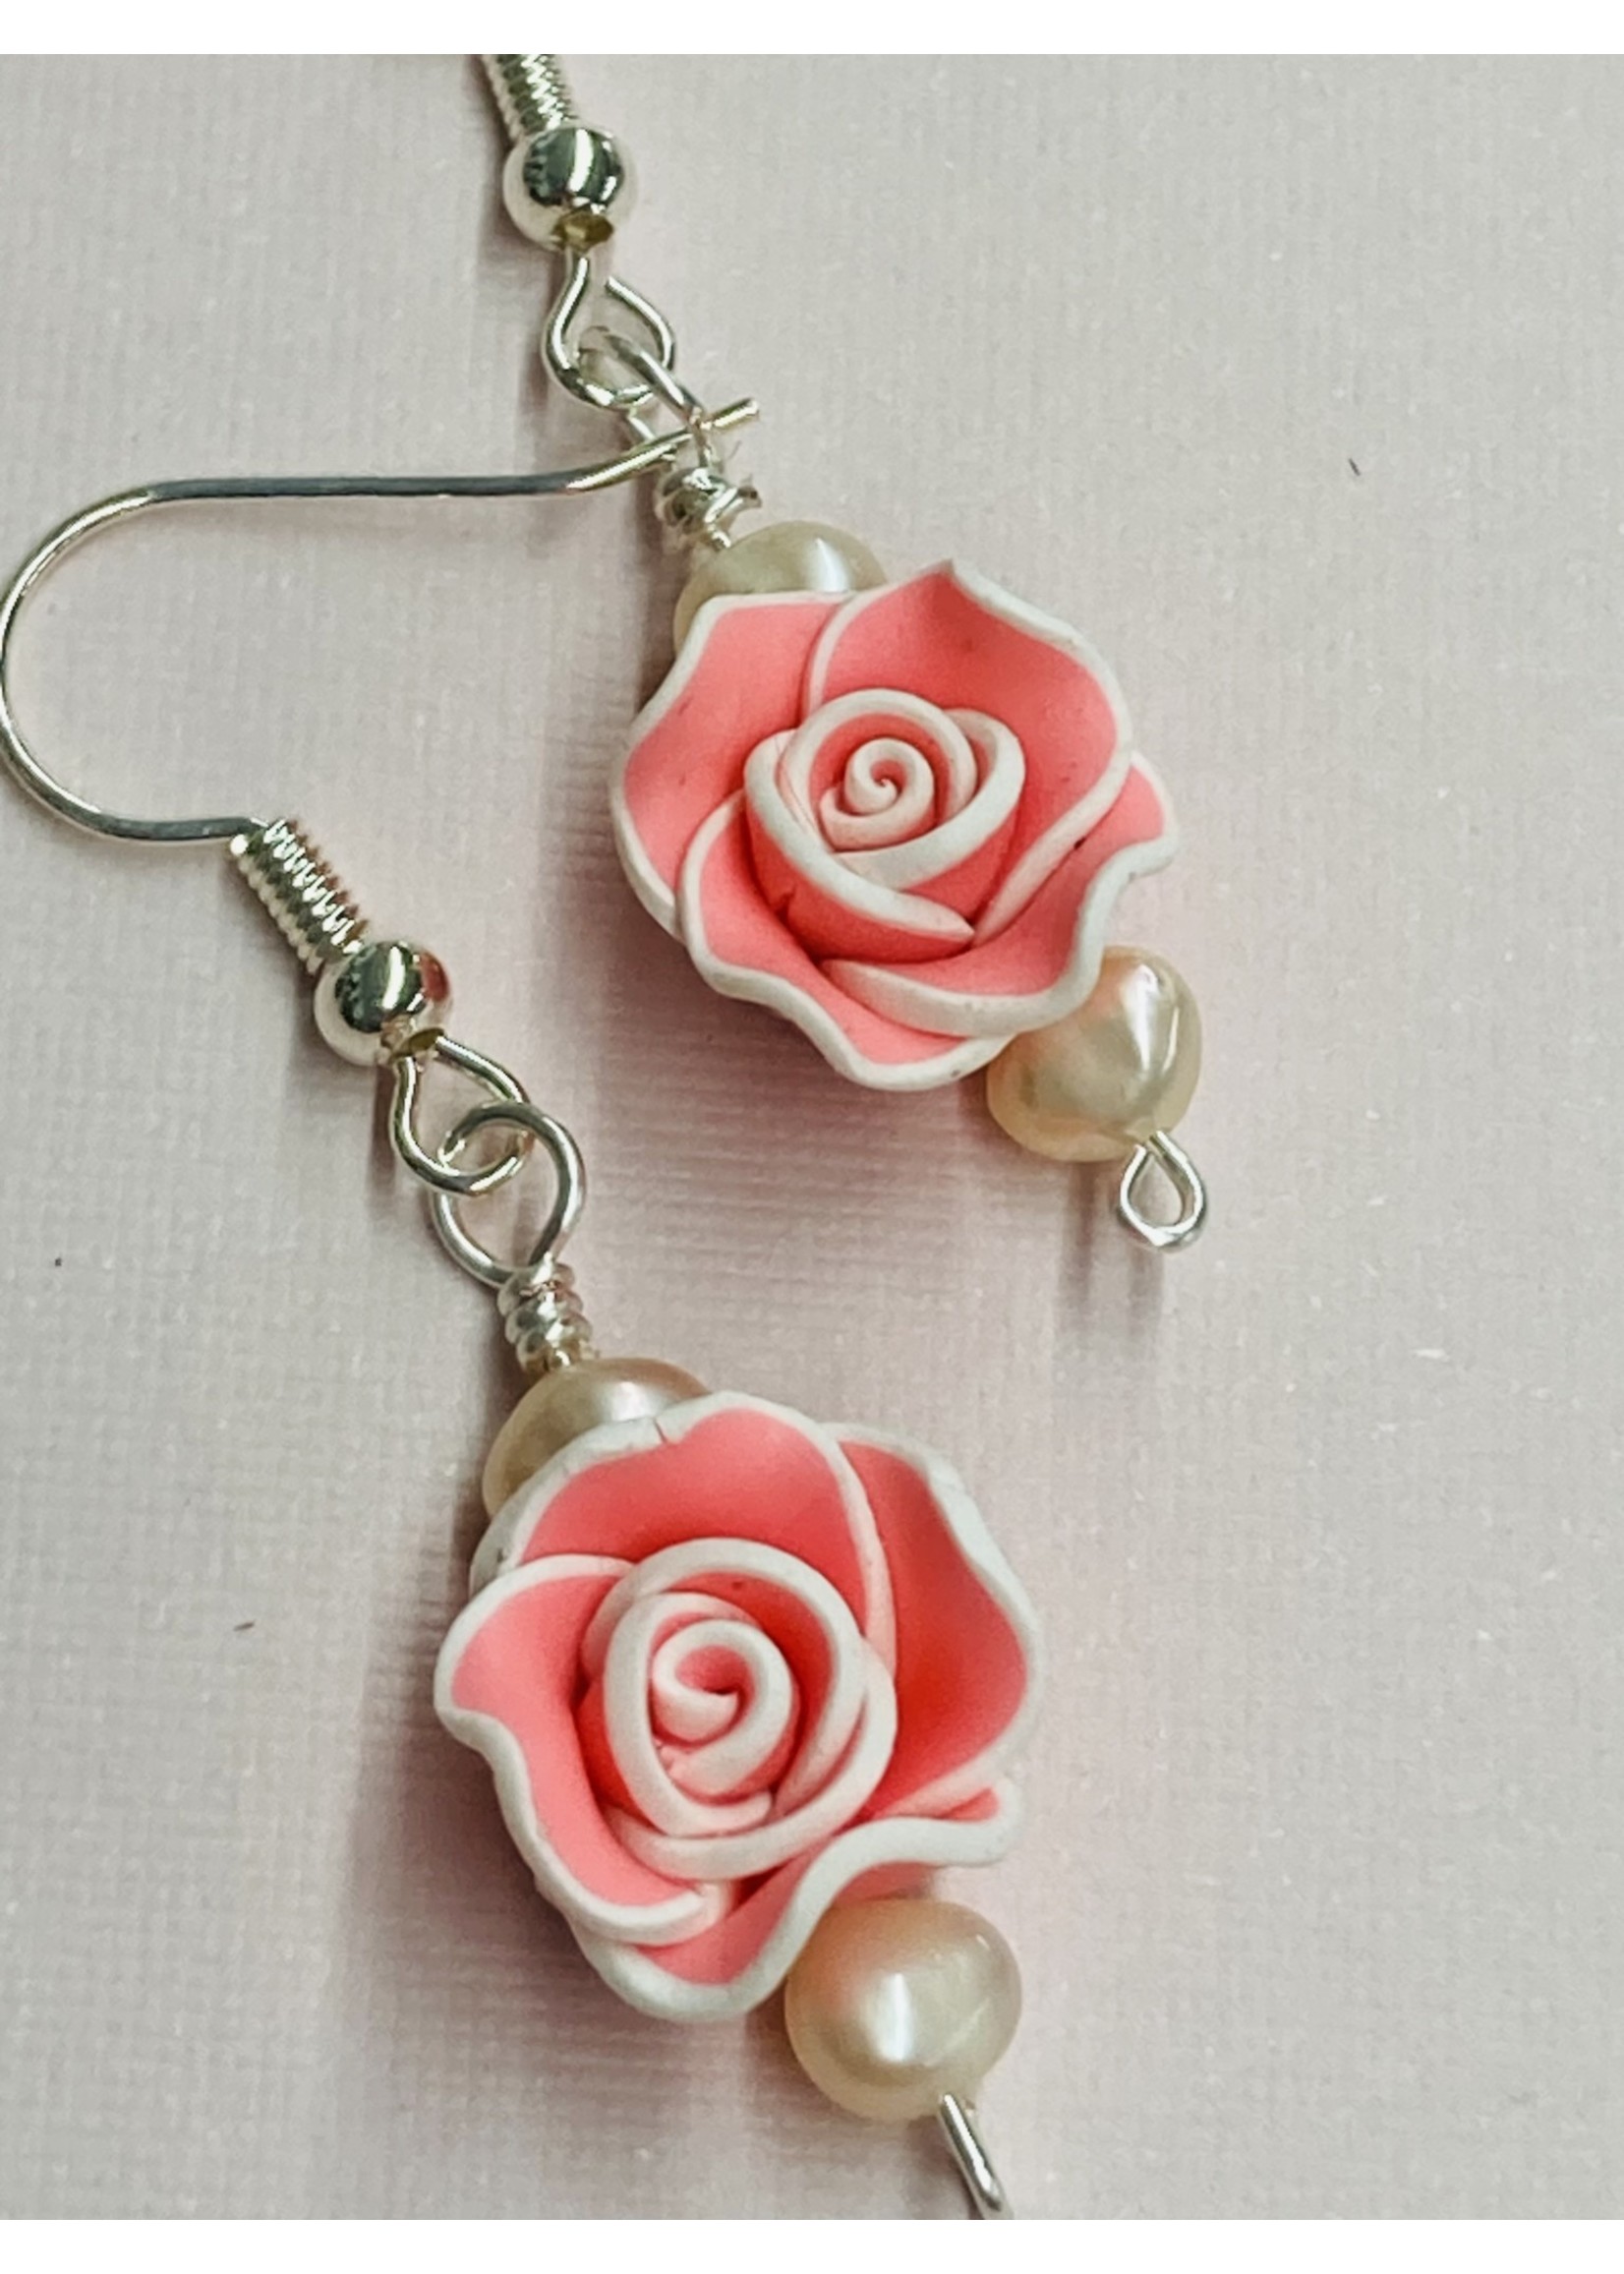 Our Twisted Dahlia E023 Pink and White Polymer Clay Rose with Freshwater Pearl Earrings